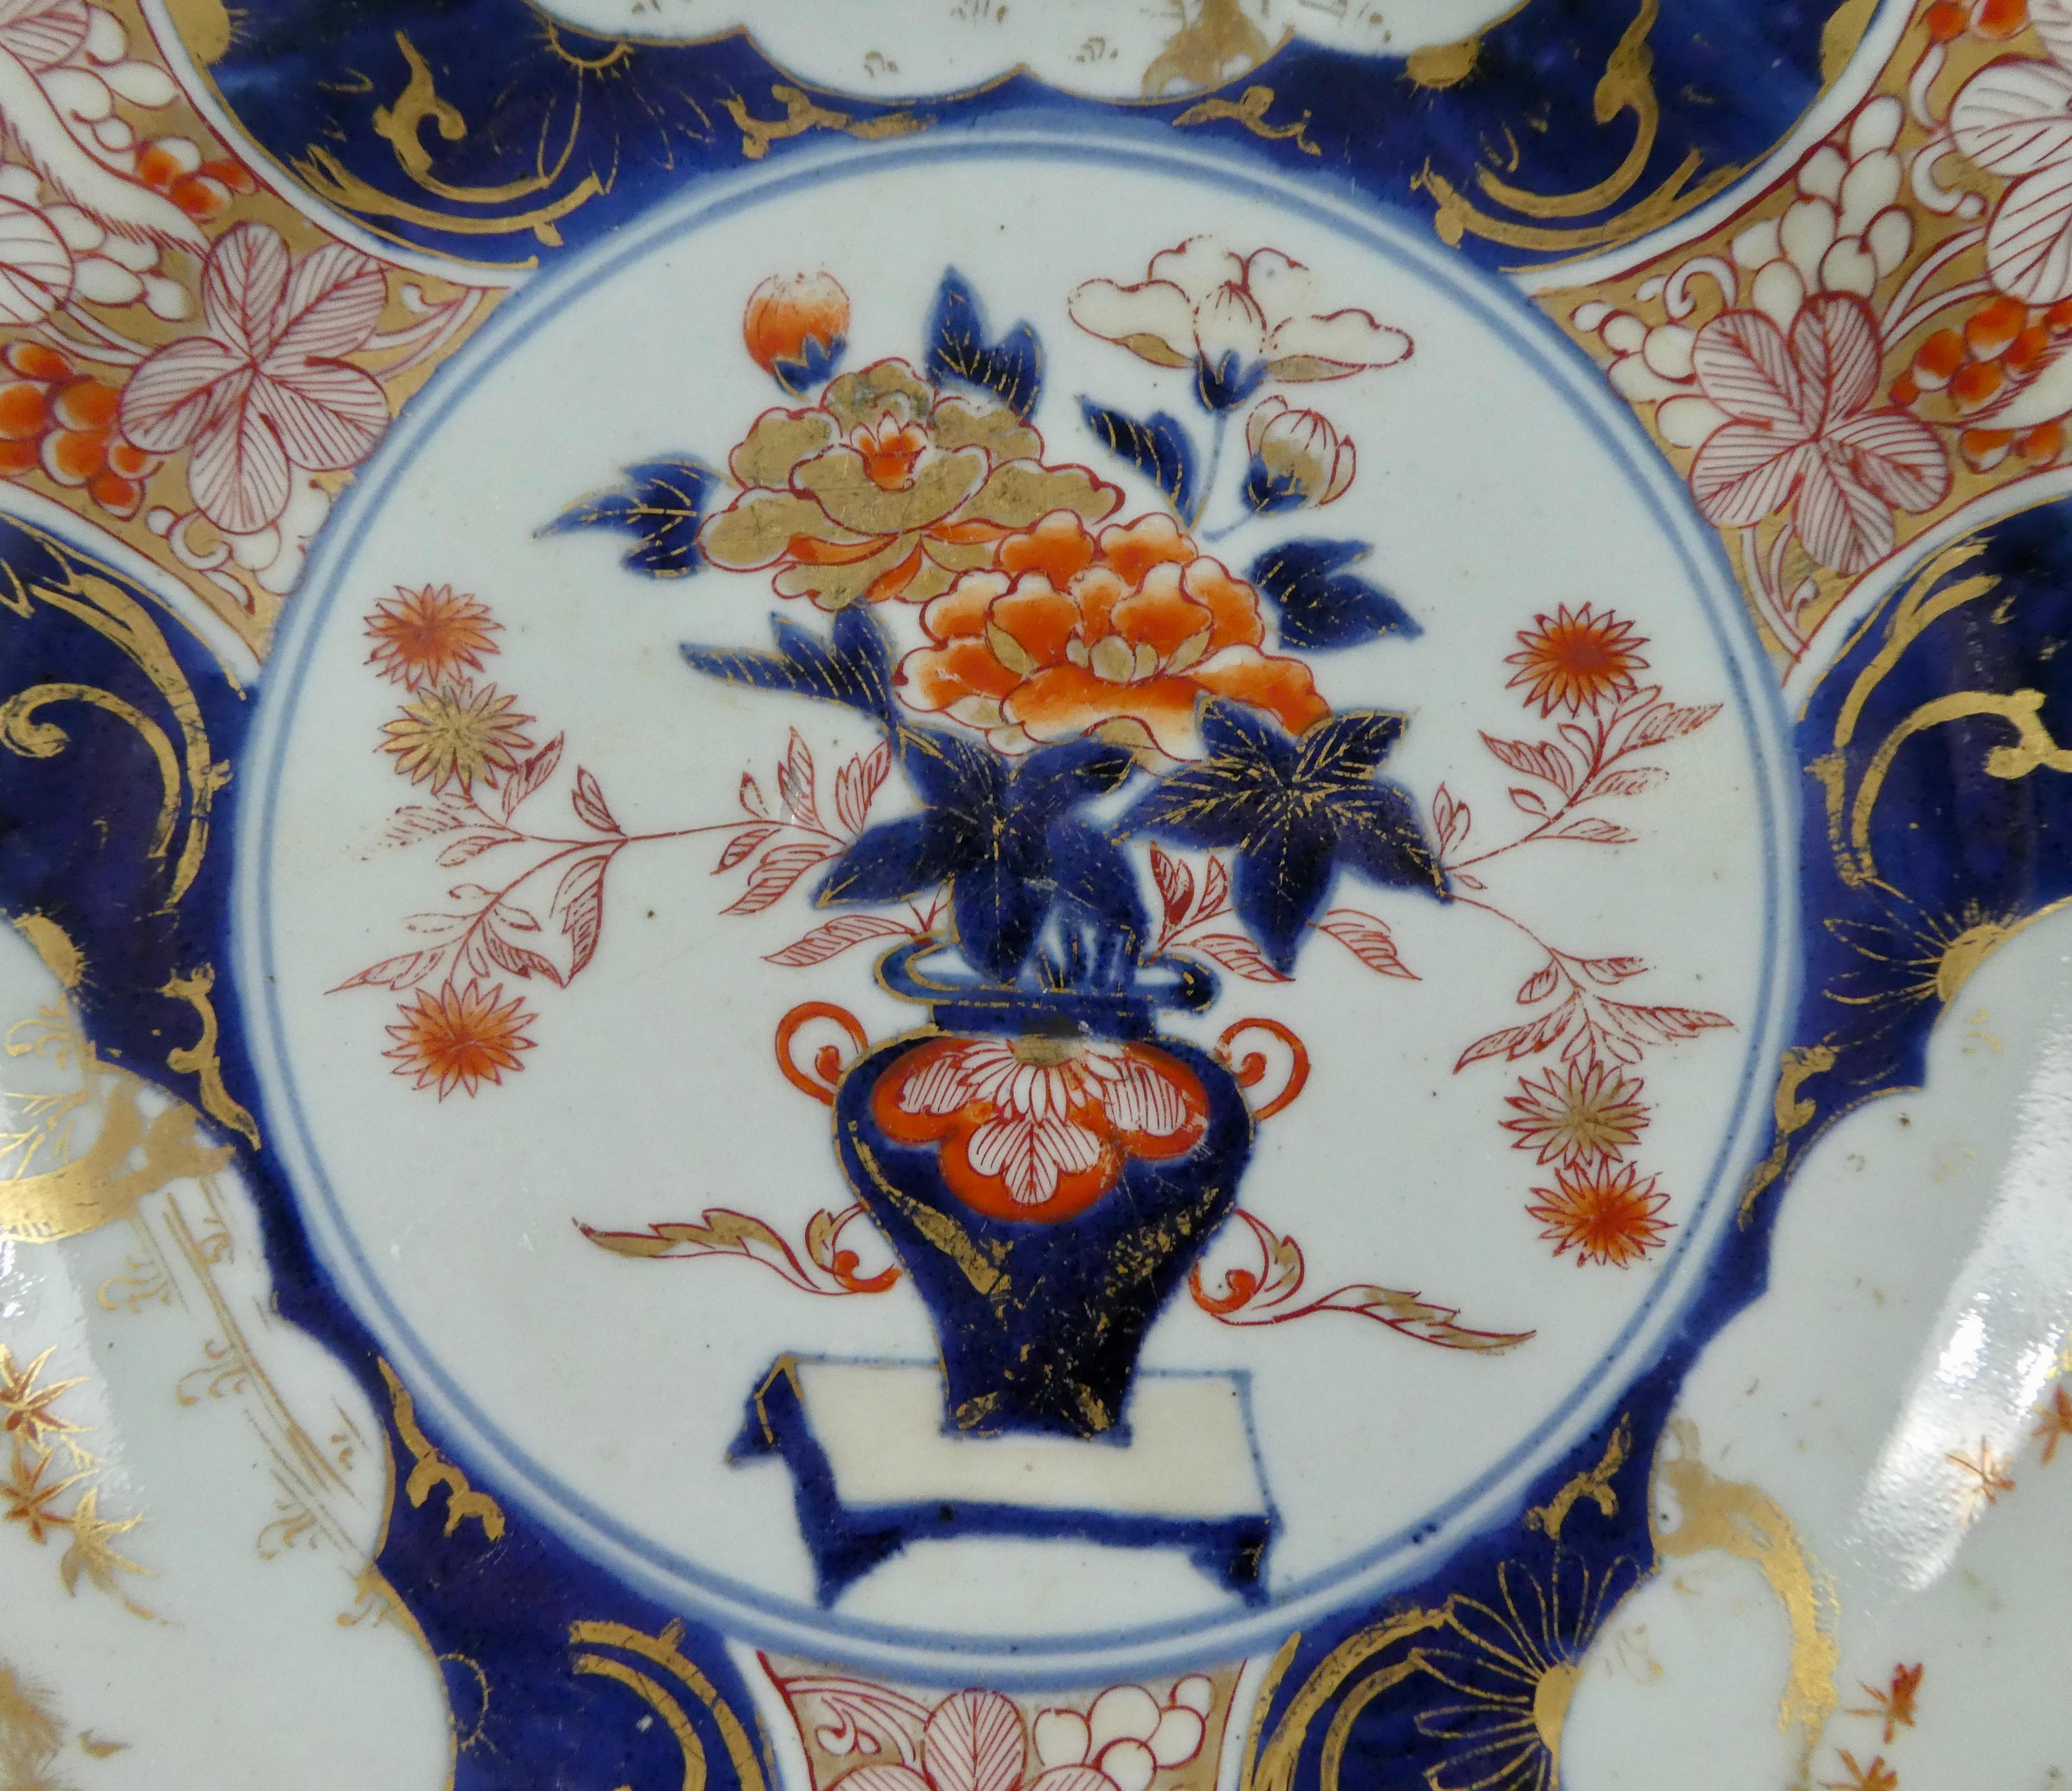 Japanese porcelain charger, Arita, circa 1700, Genroku period. The large dish, well painted in the Imari style, with a central panel of a vase of flowering plants, set upon a table. The broad border, decorated in typical style with panels of